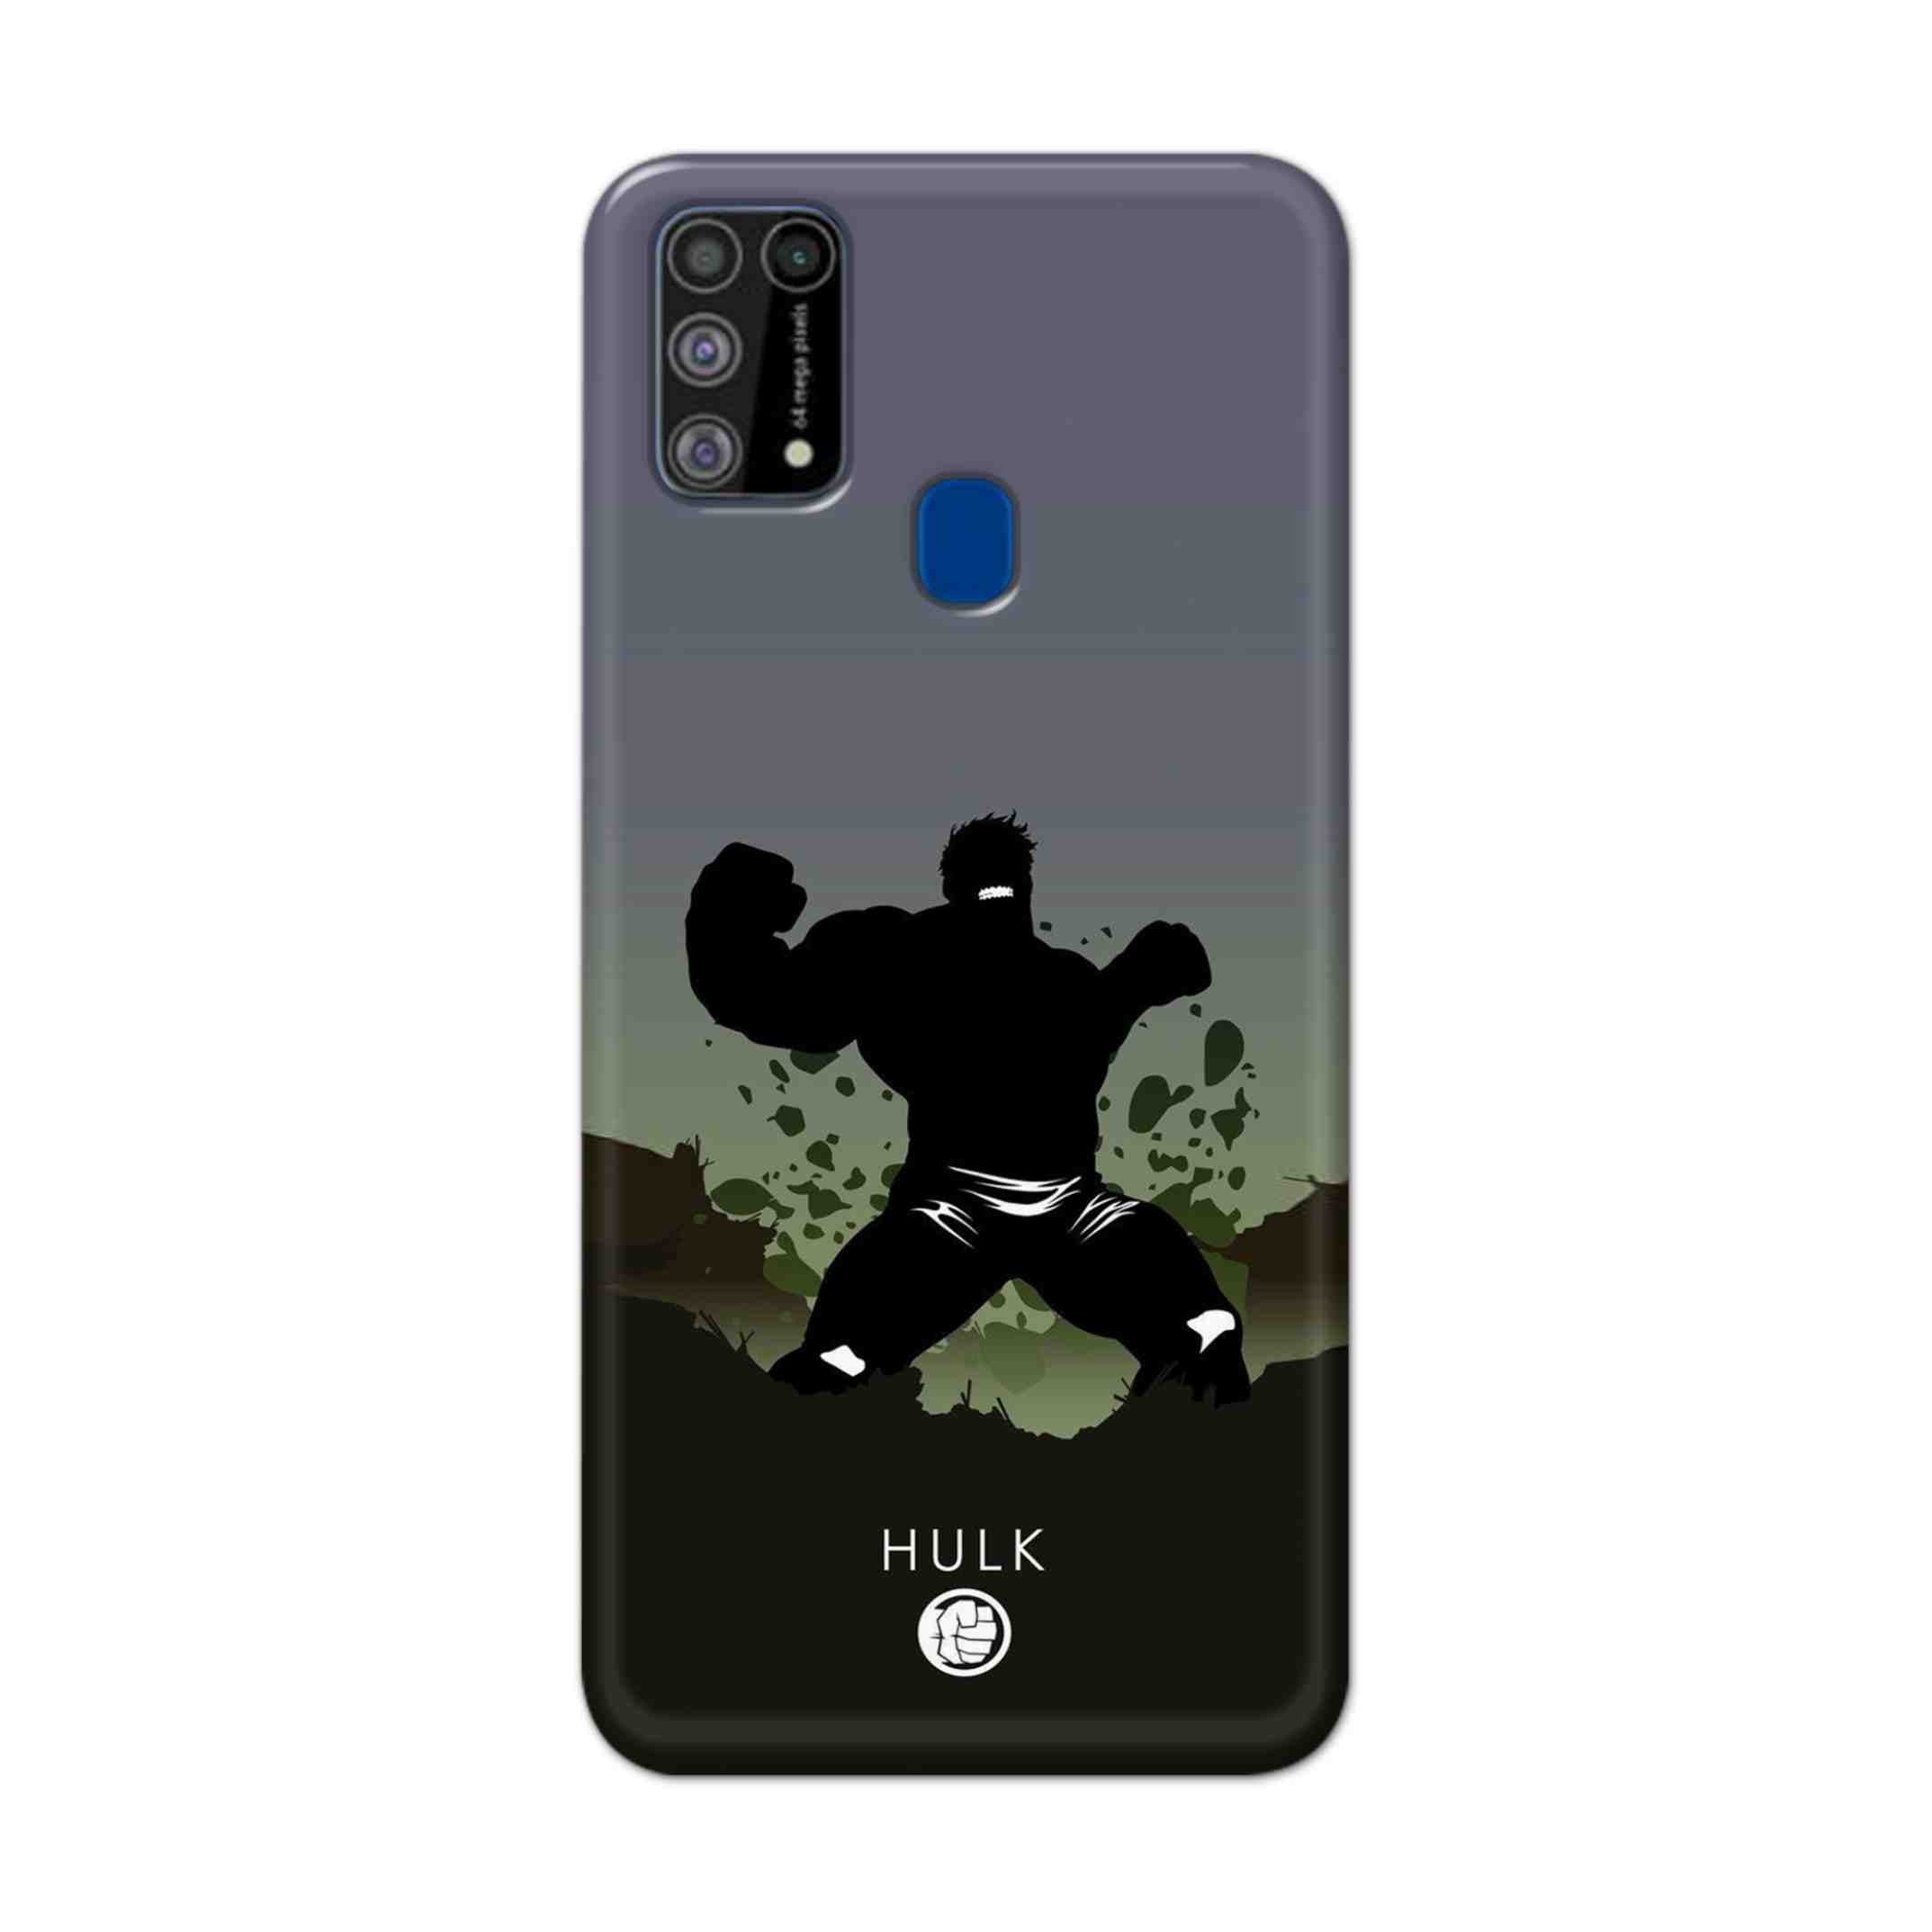 Buy Hulk Drax Hard Back Mobile Phone Case Cover For Samsung Galaxy M31 Online